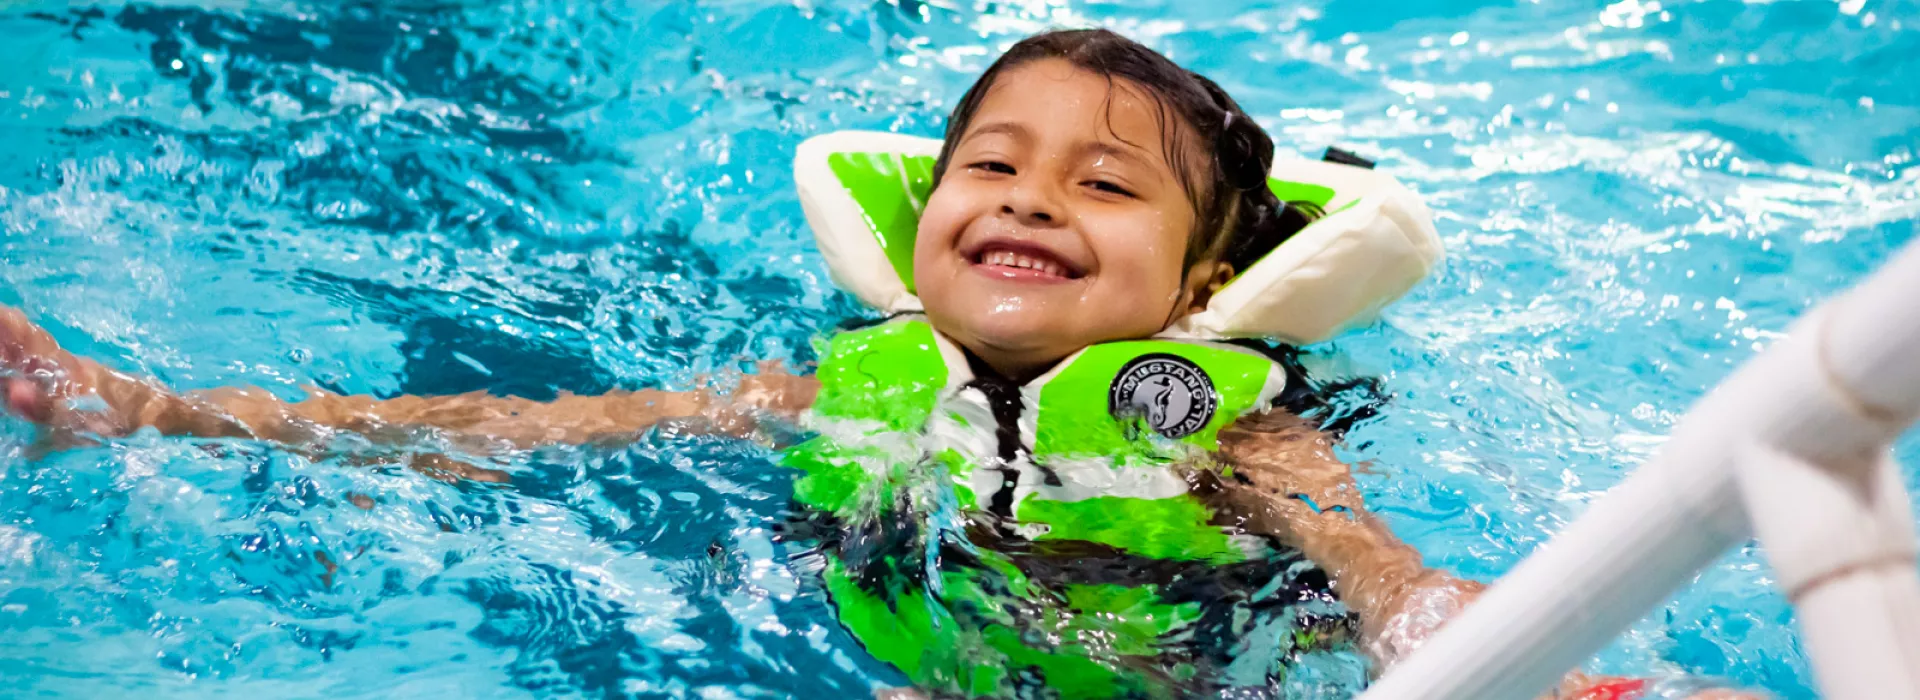 Young girl smiles at camera while floating in a blue pool. She is wearing a bright green lifejacket.